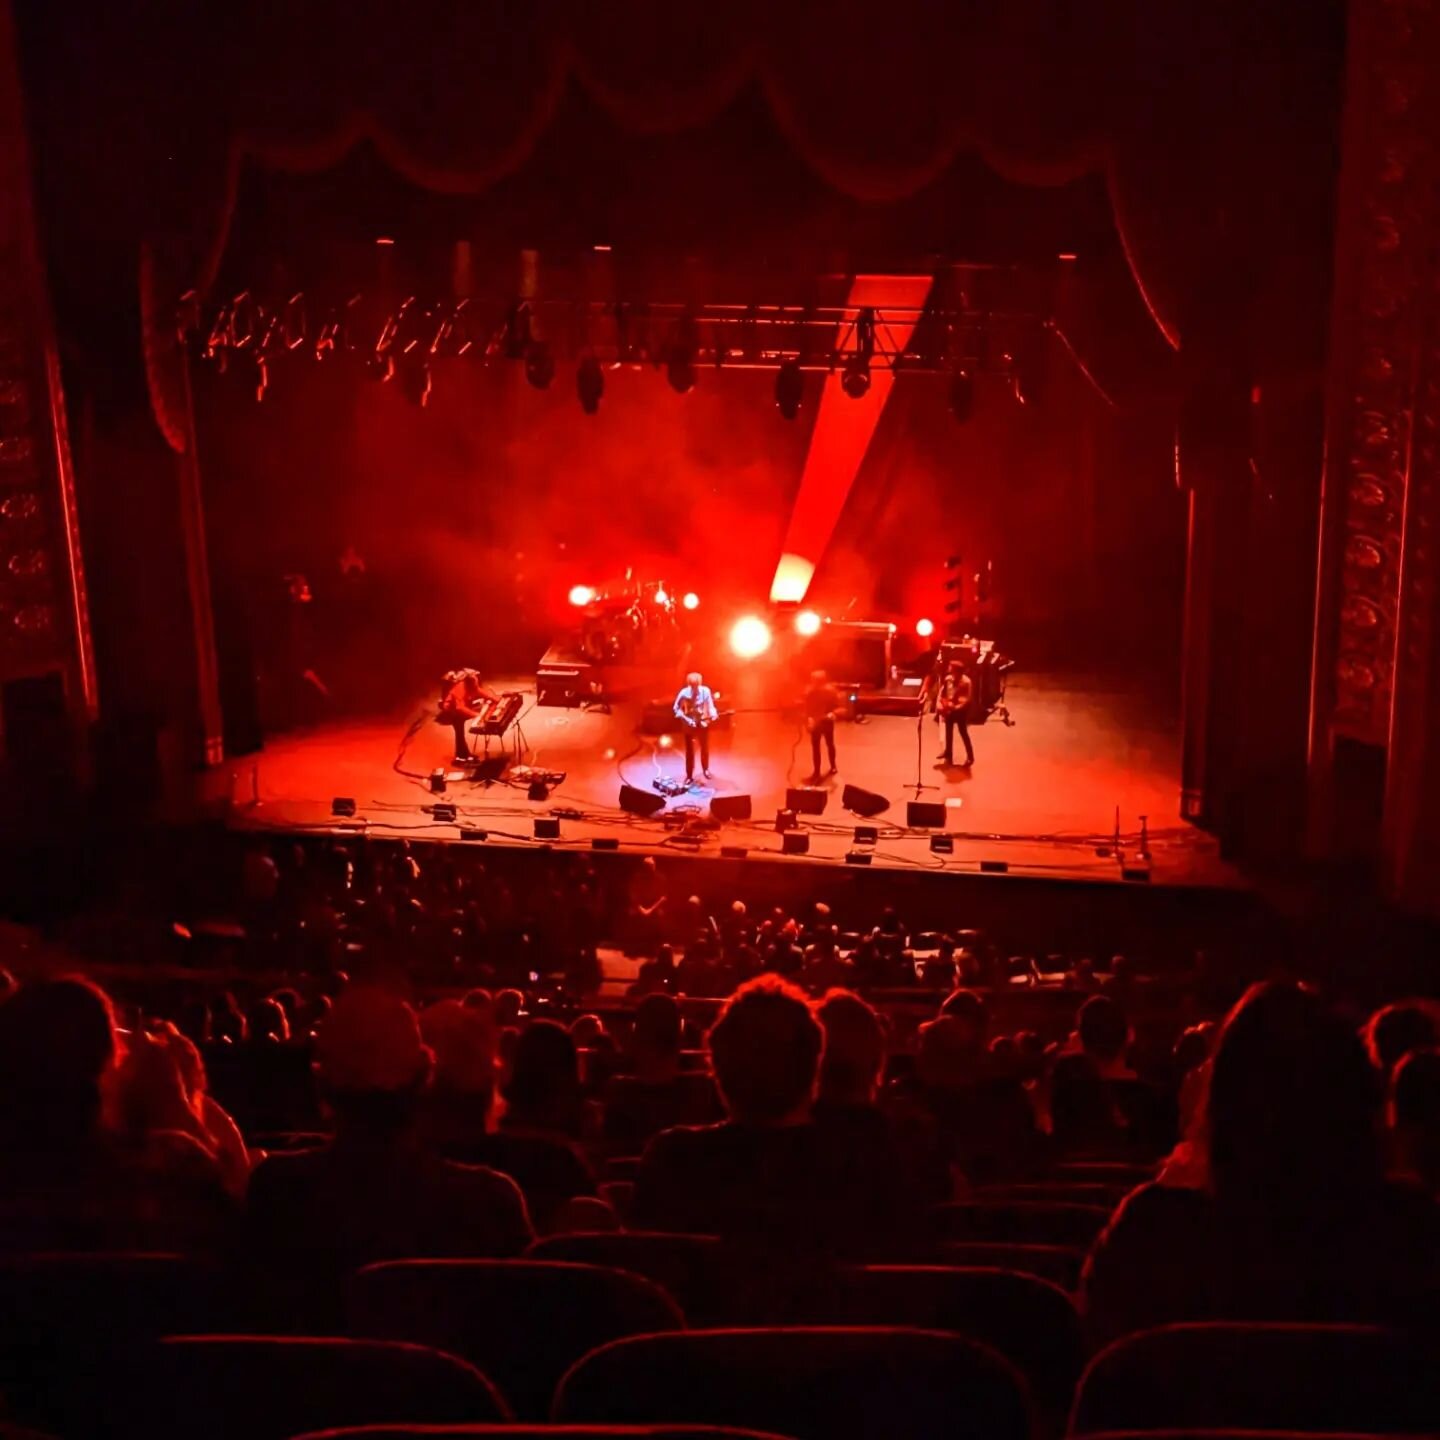 Just finished the @spoontheband set at Stifel theater. They brought down the house. Easily one of the best live performances I've ever seen. Interpol's going to have a hell of a time following them.

#stlevents&nbsp;#saintlouis&nbsp;#explorestlouis&n